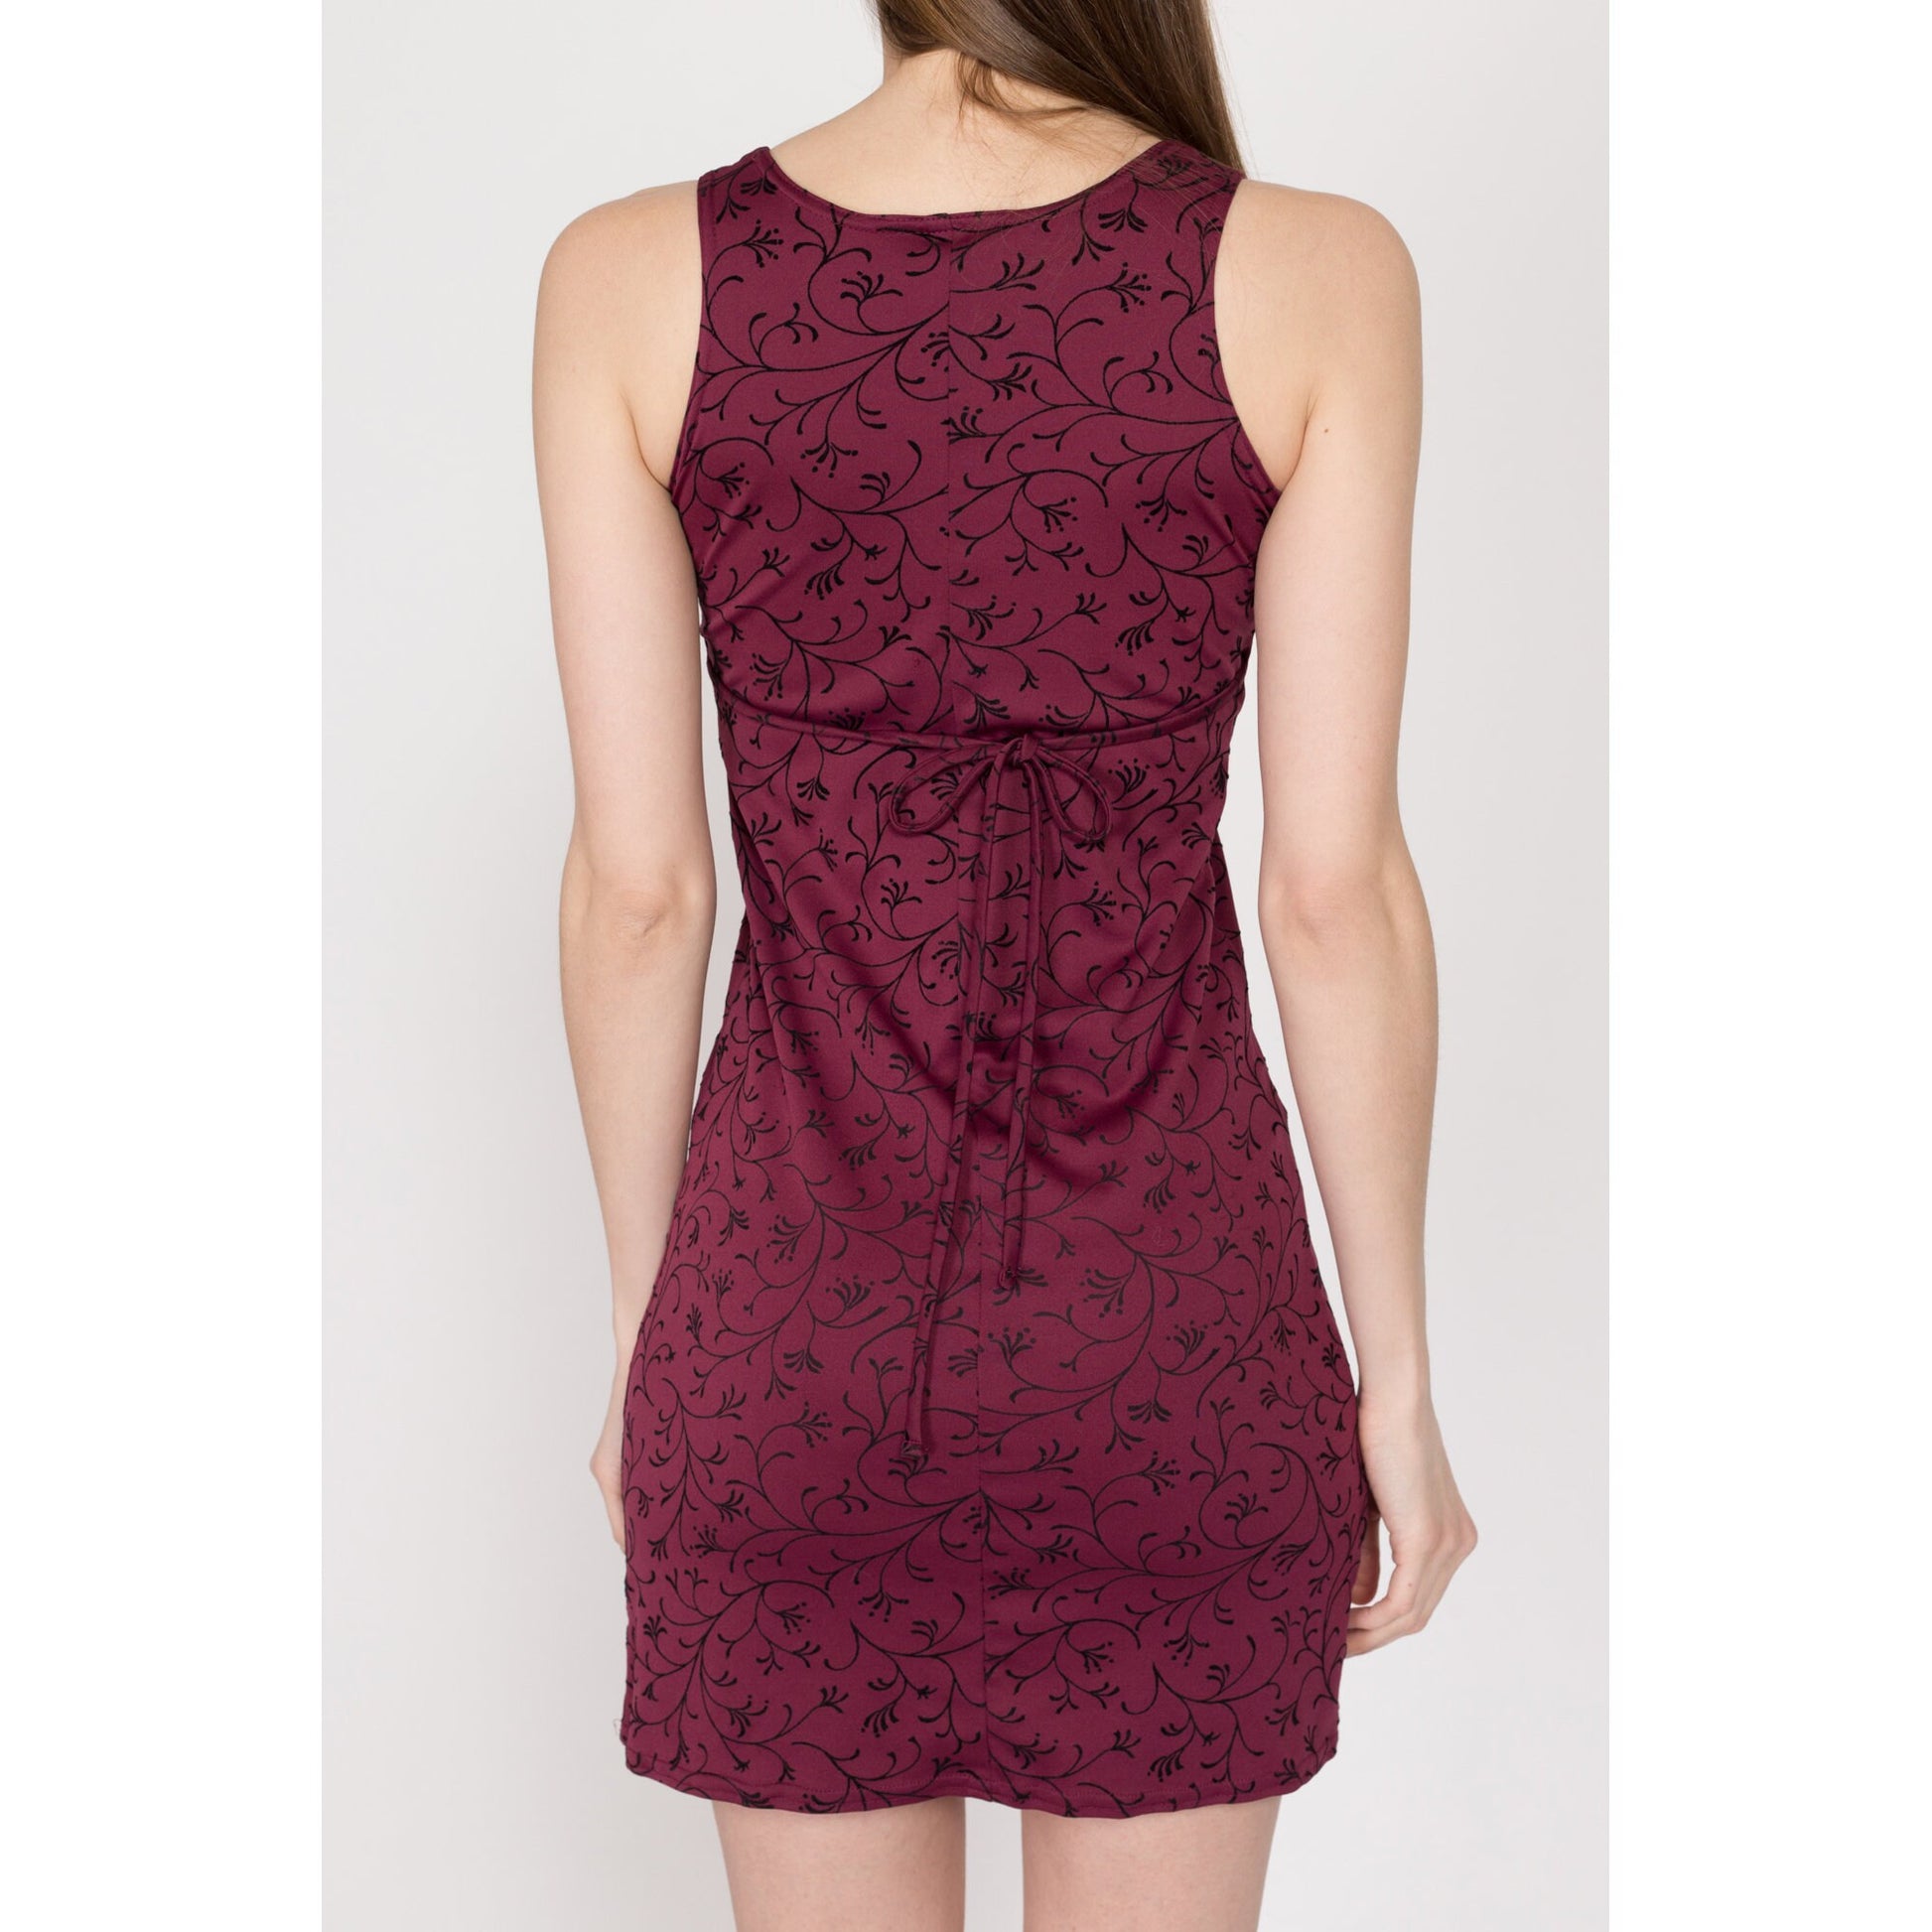 Petite XS 90s Wine Red Floral Mini Grunge Dress | Vintage Sleeveless Tie Back Fitted Dress